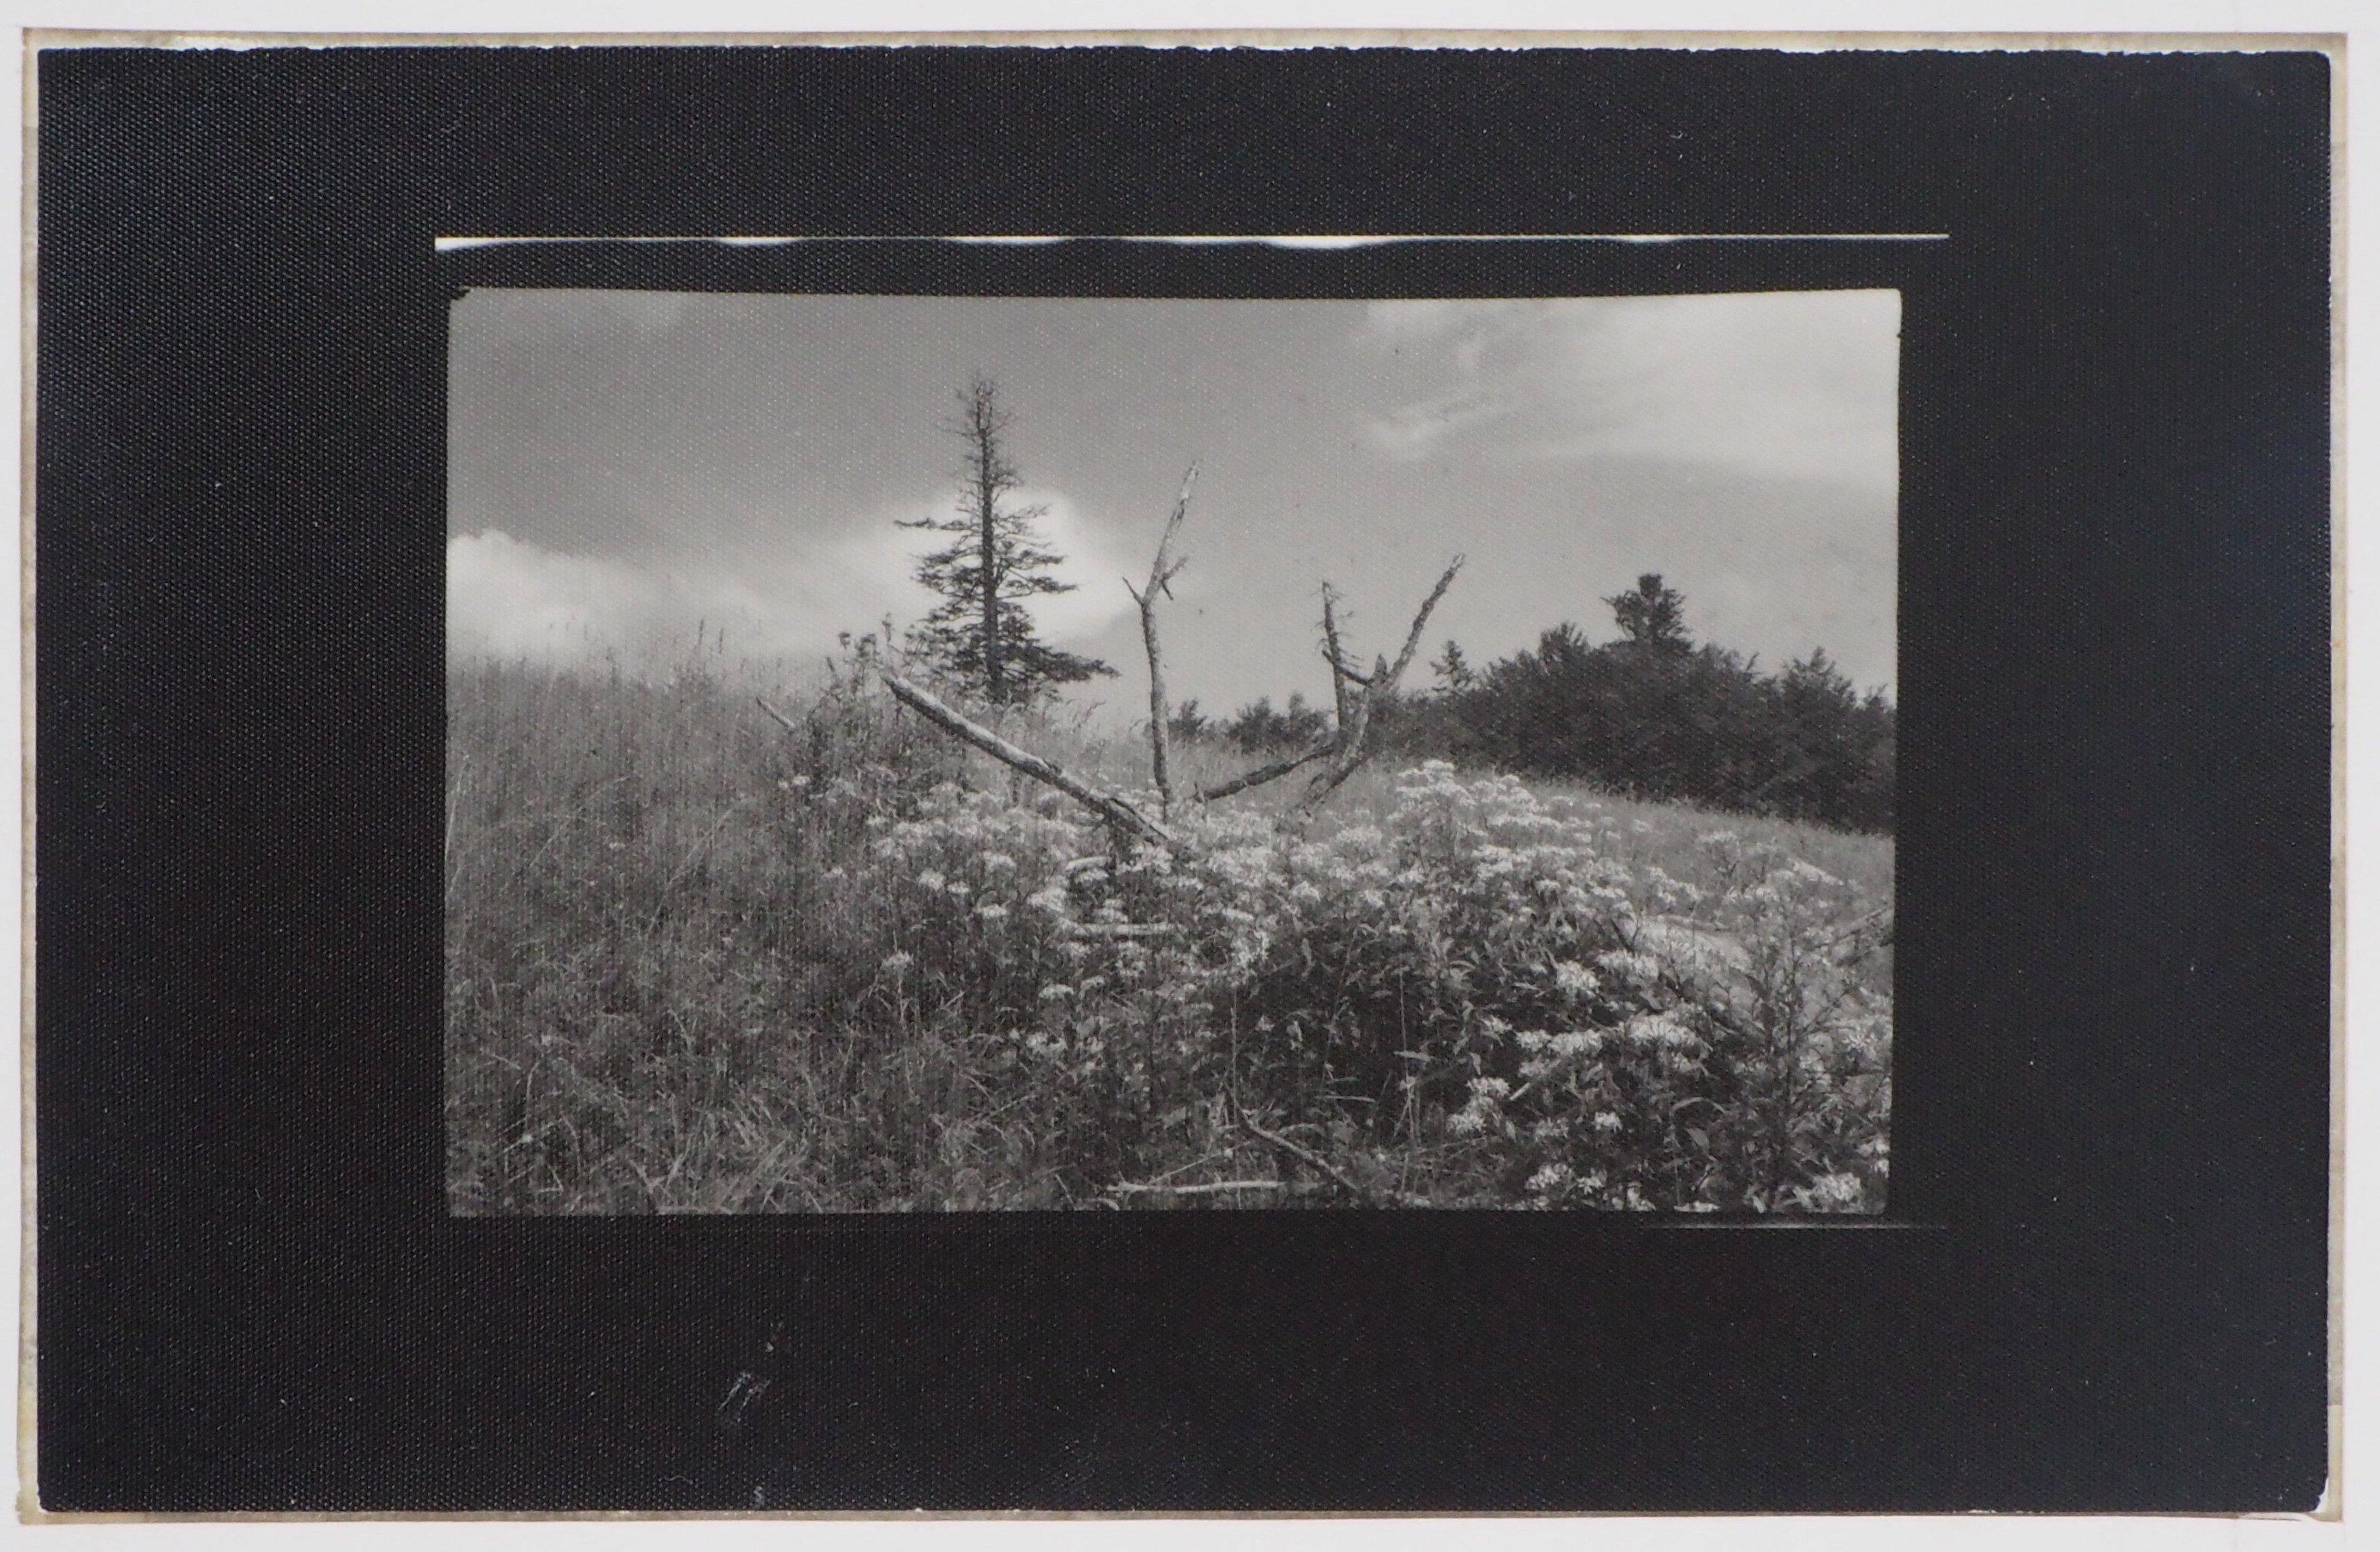 Forest of Mionsi 17 - Original Gelatin Silver Photograph, 1962